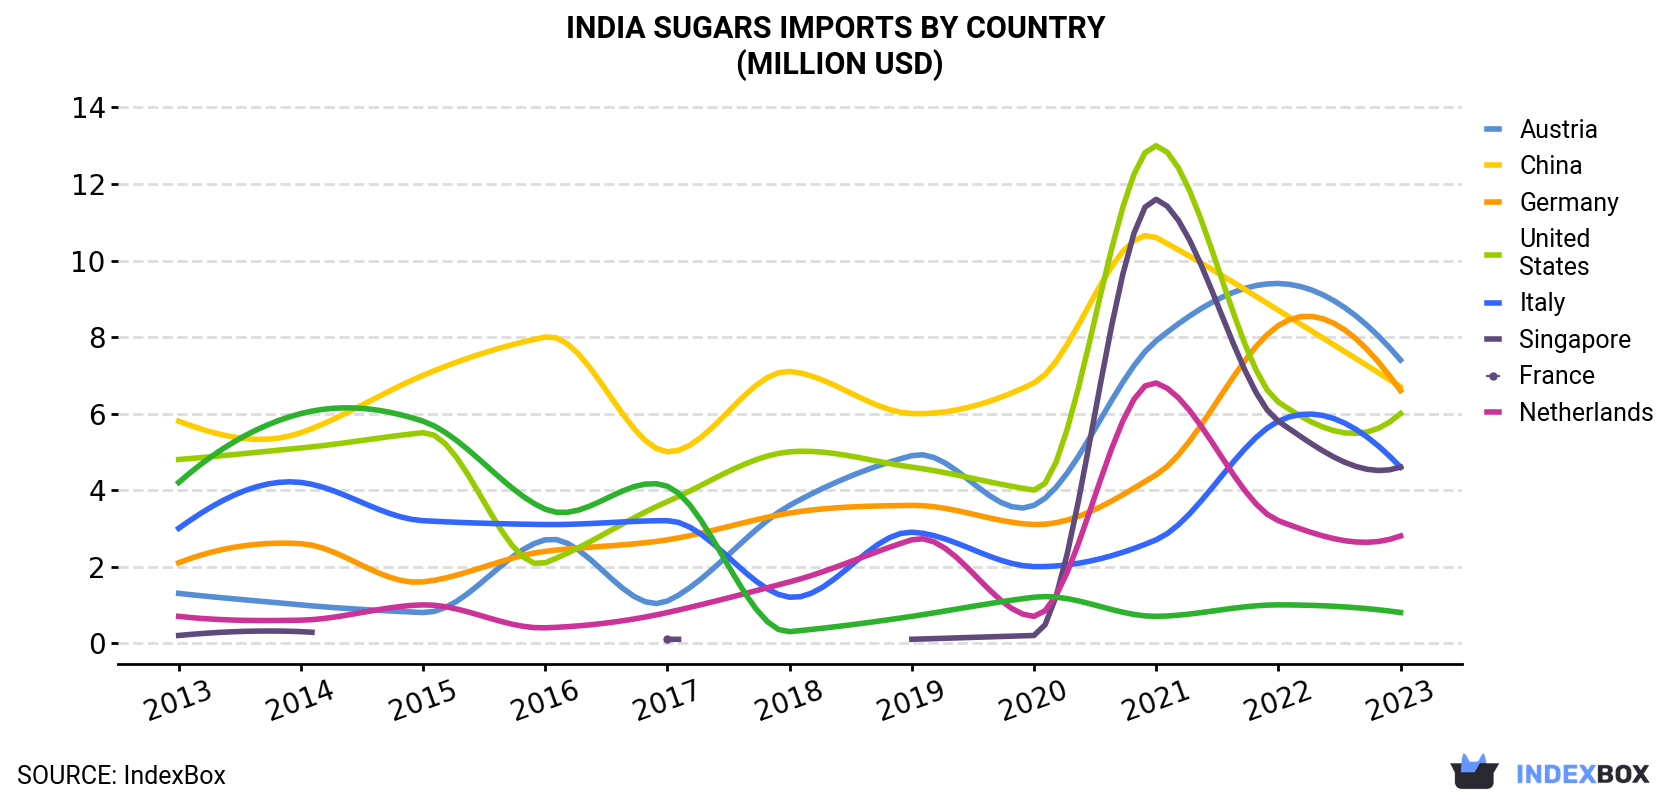 India Sugars Imports By Country (Million USD)